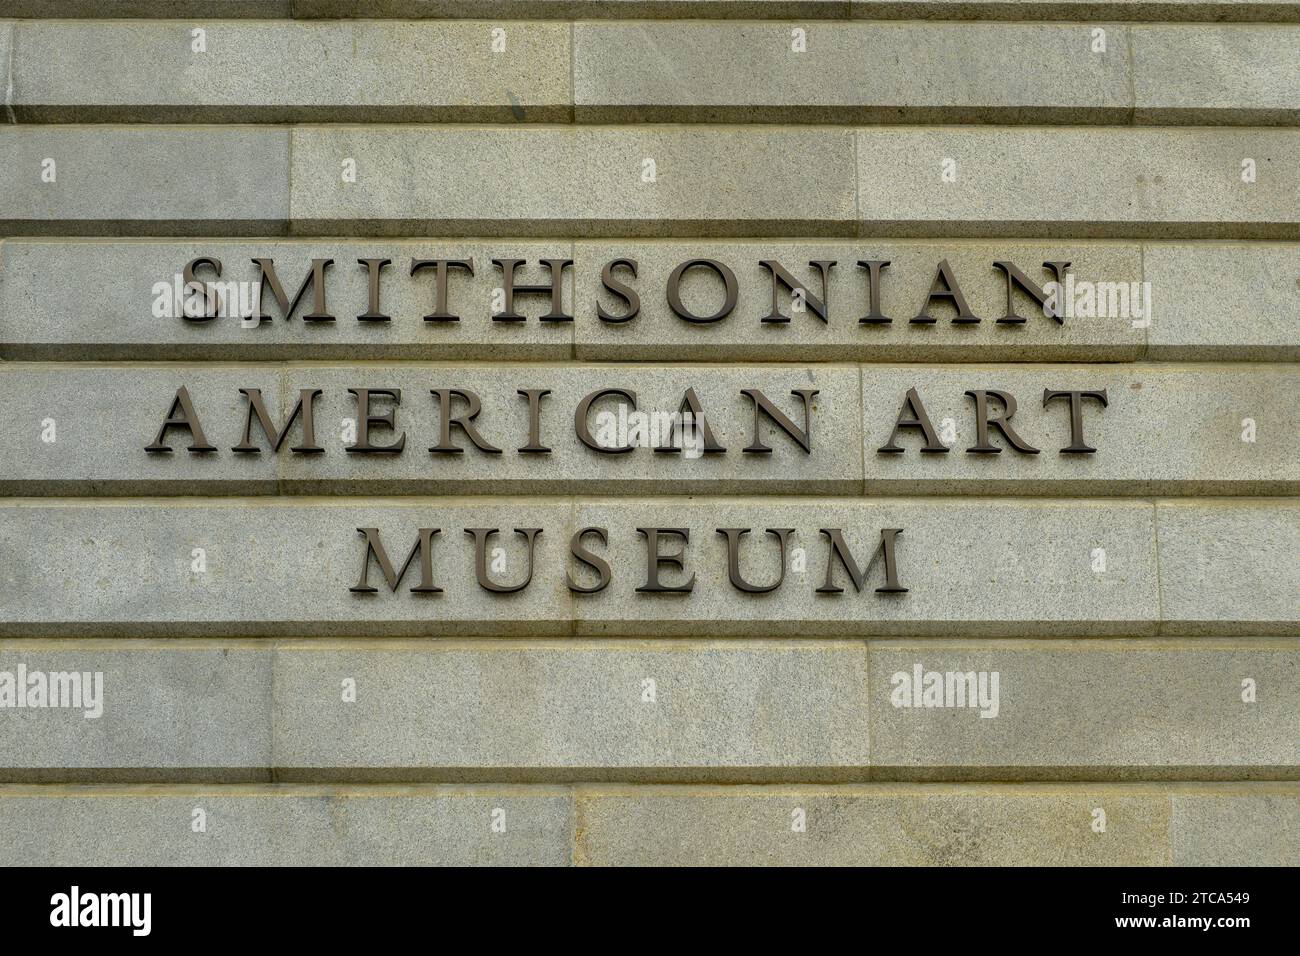 Smithsonian American Art Museum sign outside the building in Washington DC Stock Photo